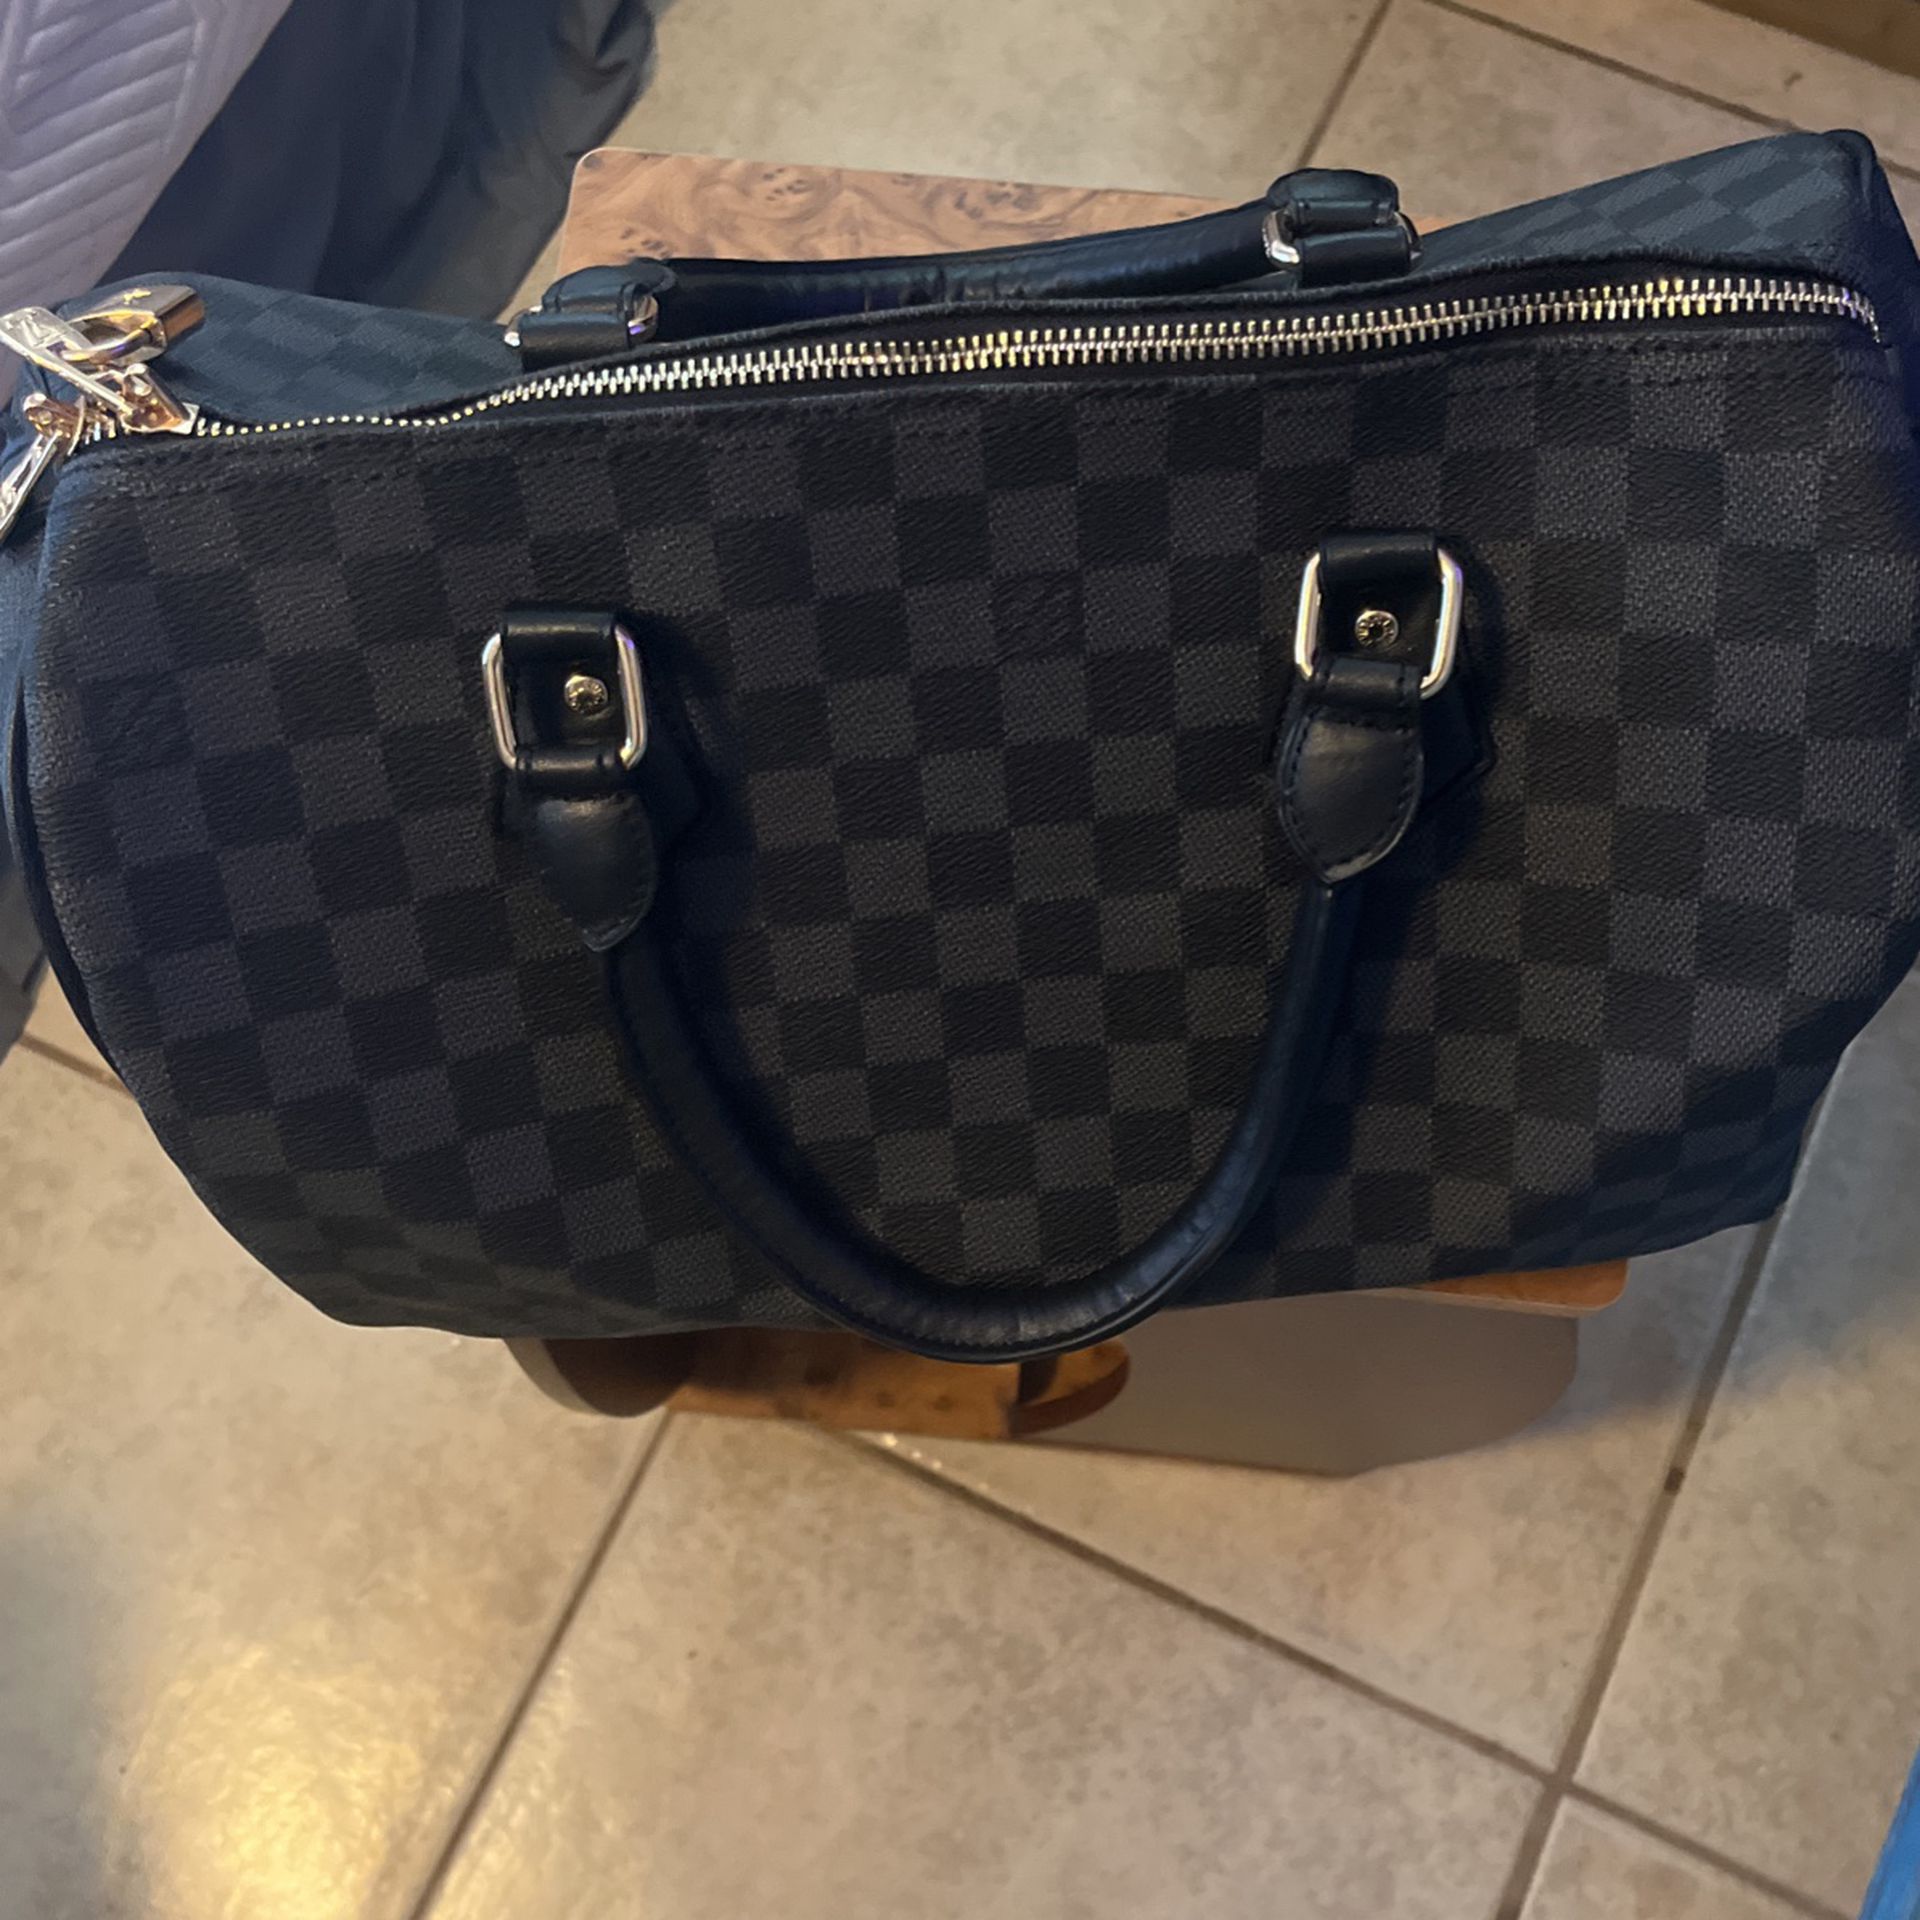 LV Duffle Bags – Exclusive Fitz